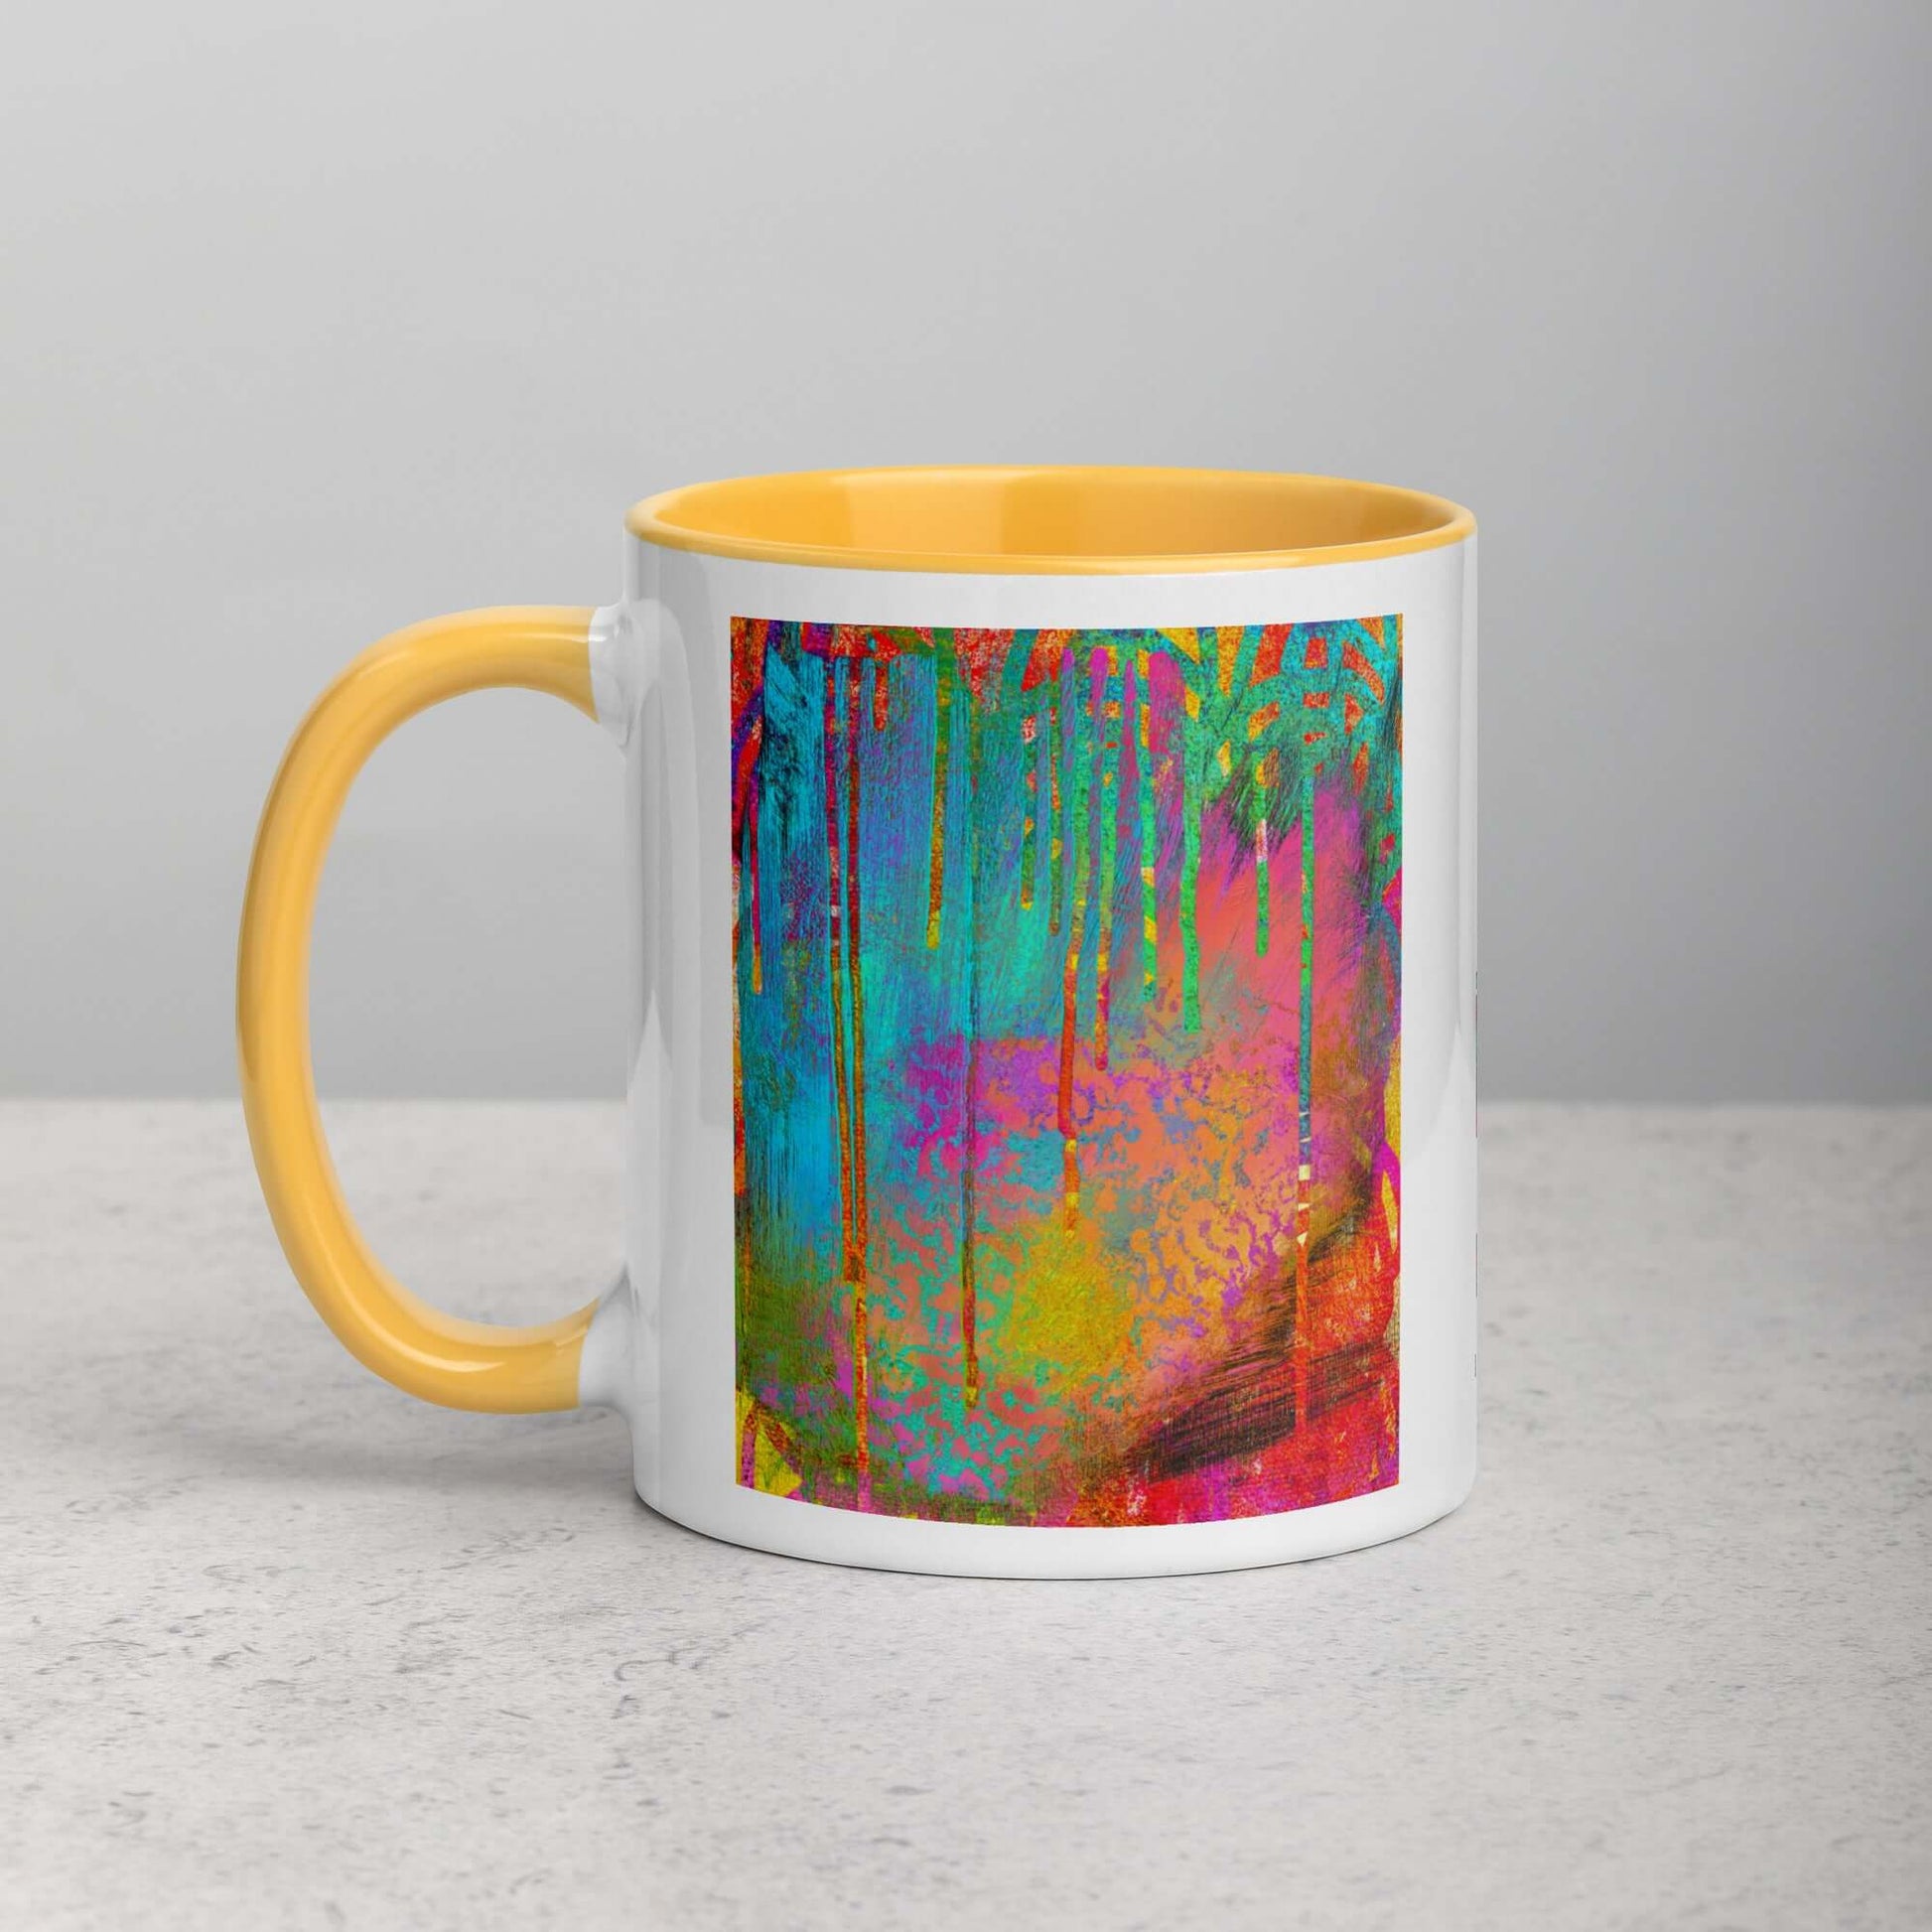 Paint Drips on Colorful Background “Into the Beyond” Abstract Art Mug with Color Golden Yellow Inside Left Handed Front View